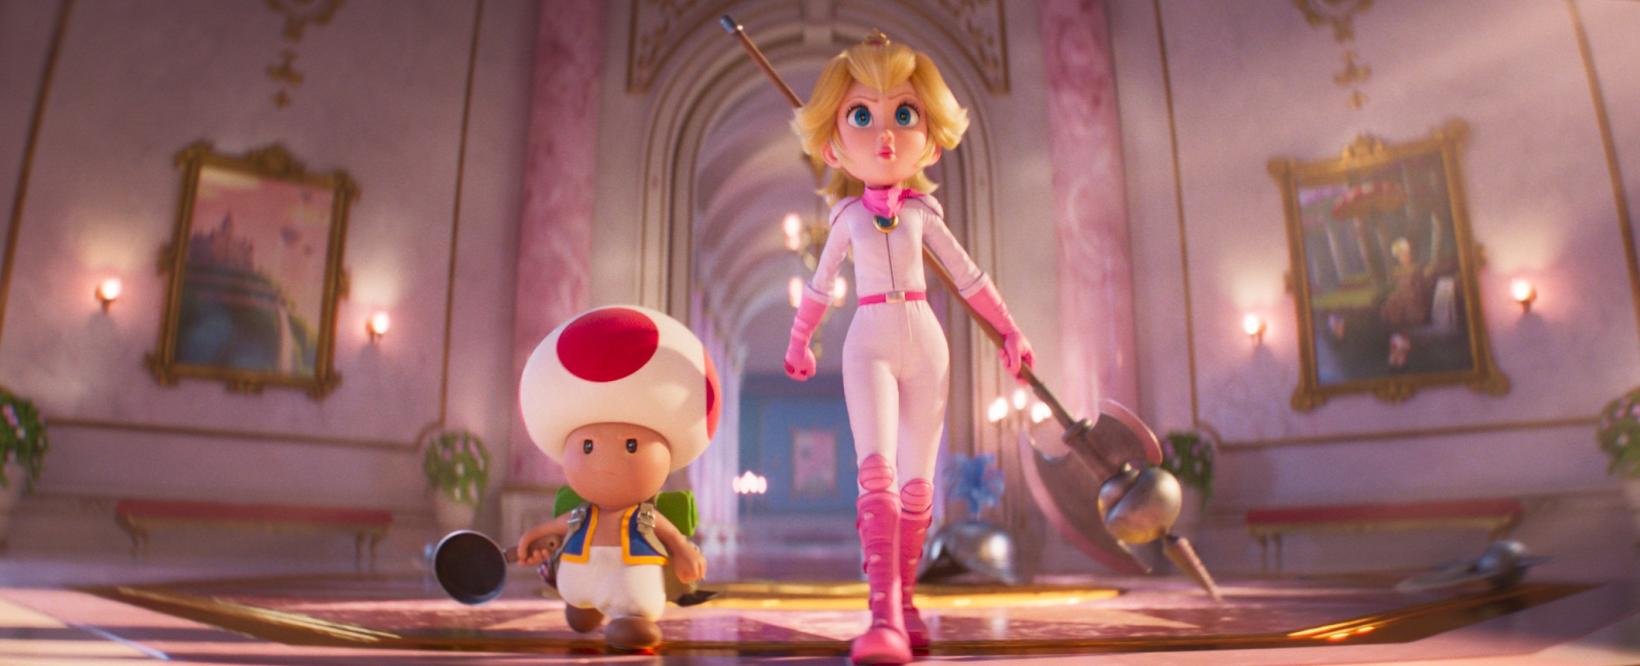 REVIEW: The Mario movie is a fun experience for all ages – Manual RedEye